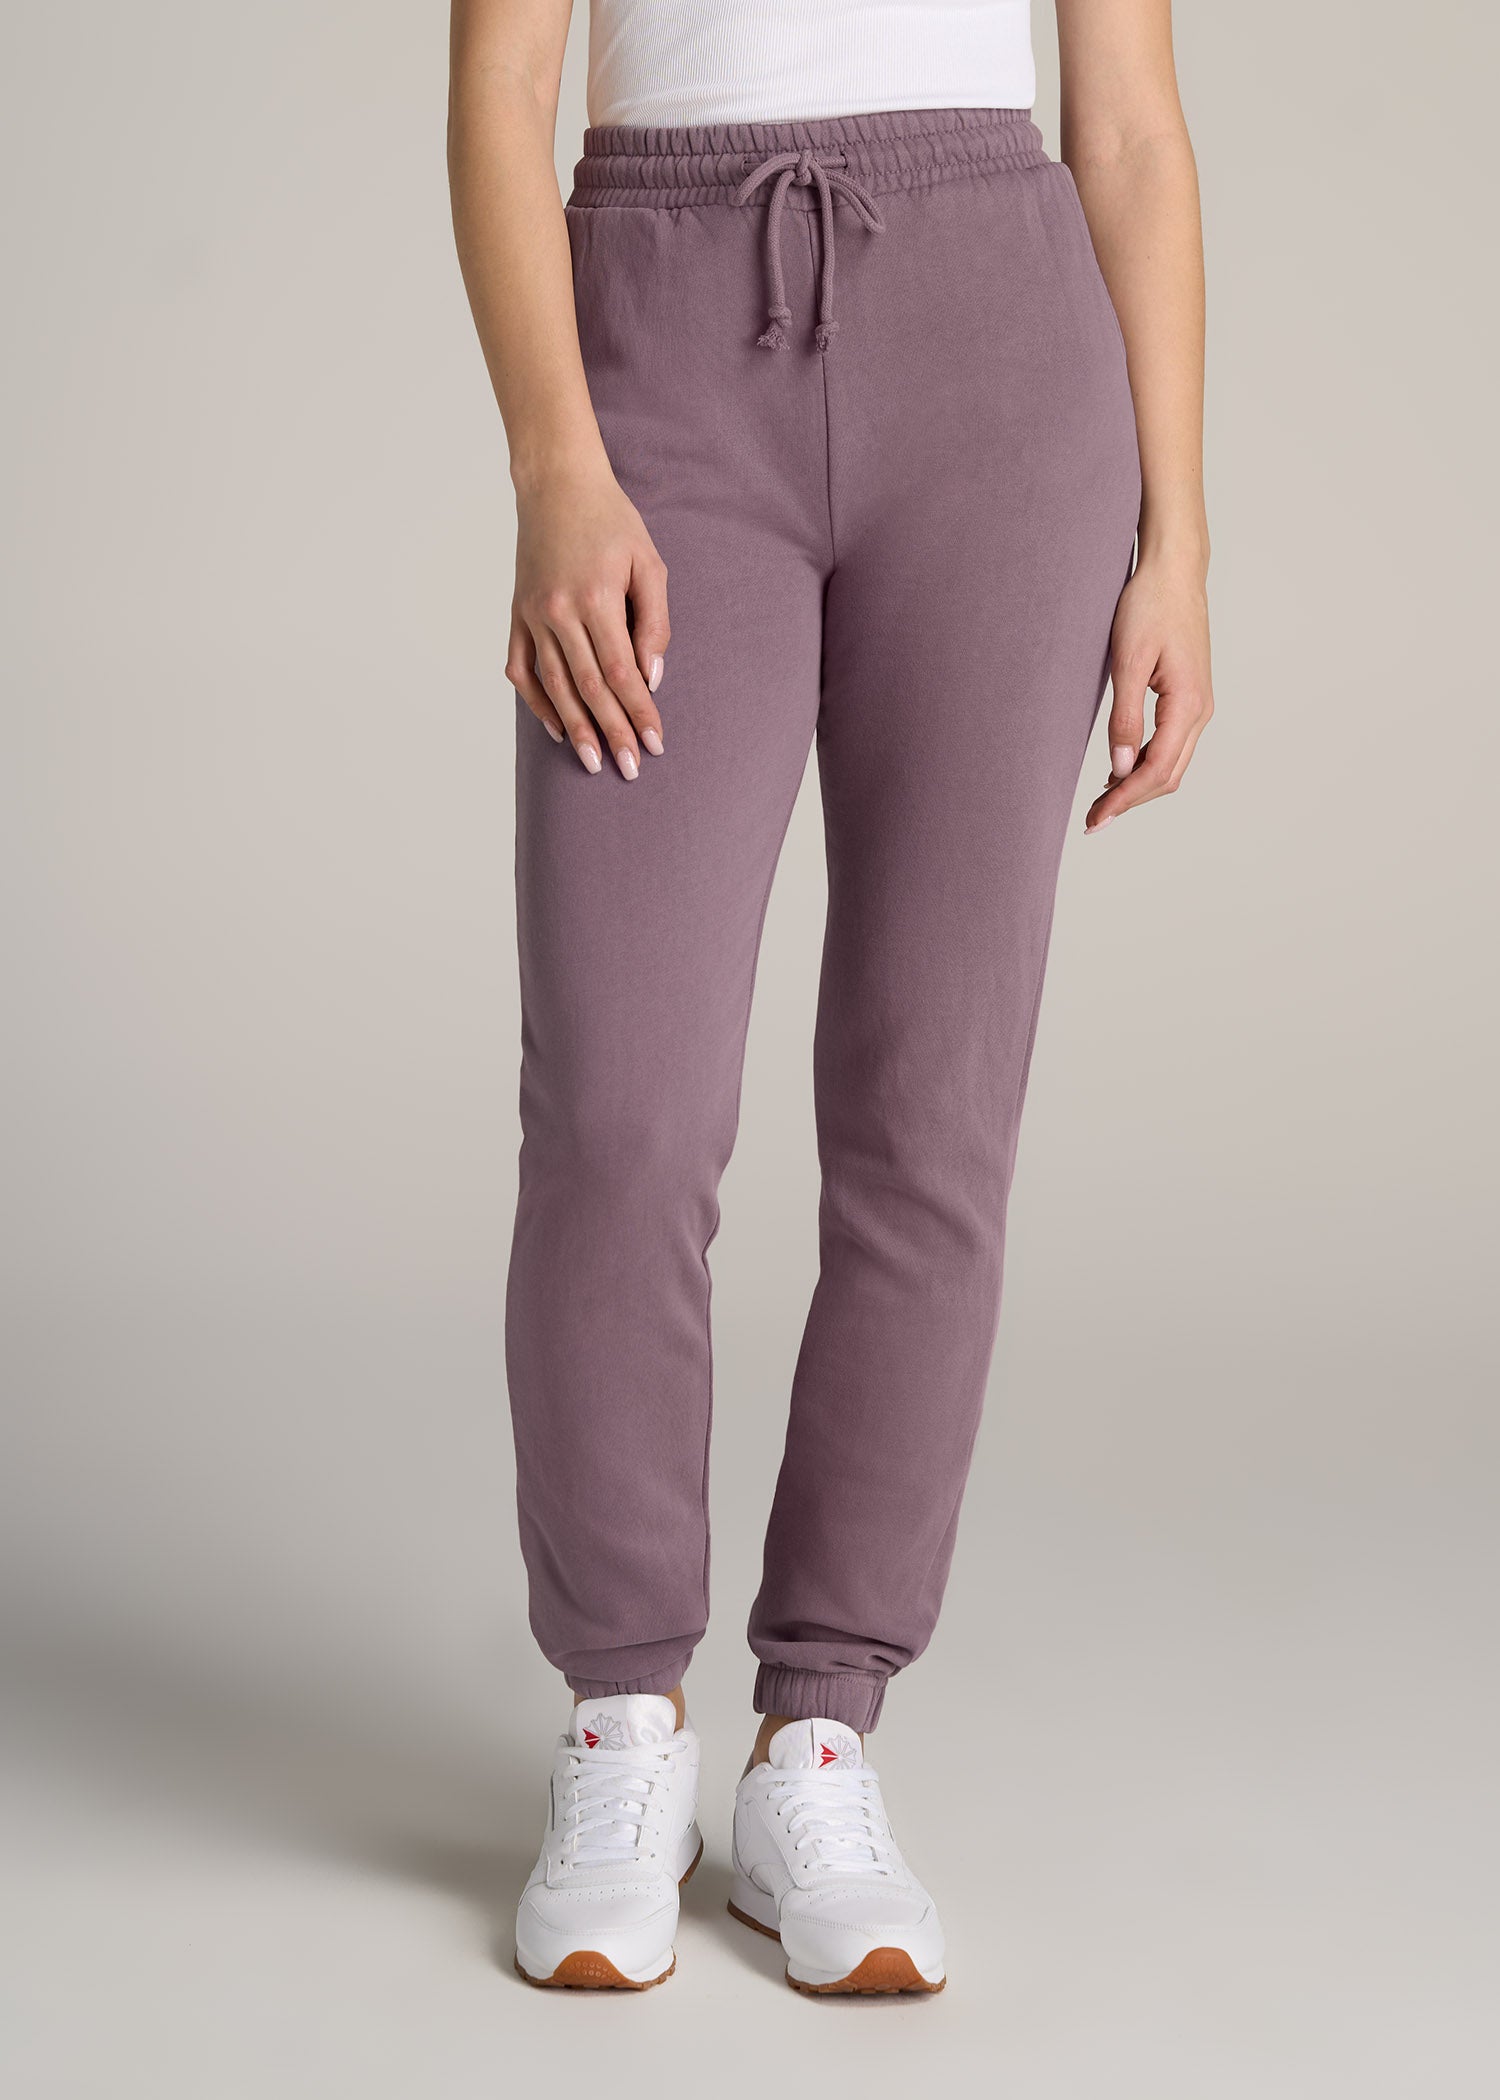 High-Rise Fleece Joggers, GREY  Girl sweatpants, Outfits for teens, Hollister  joggers